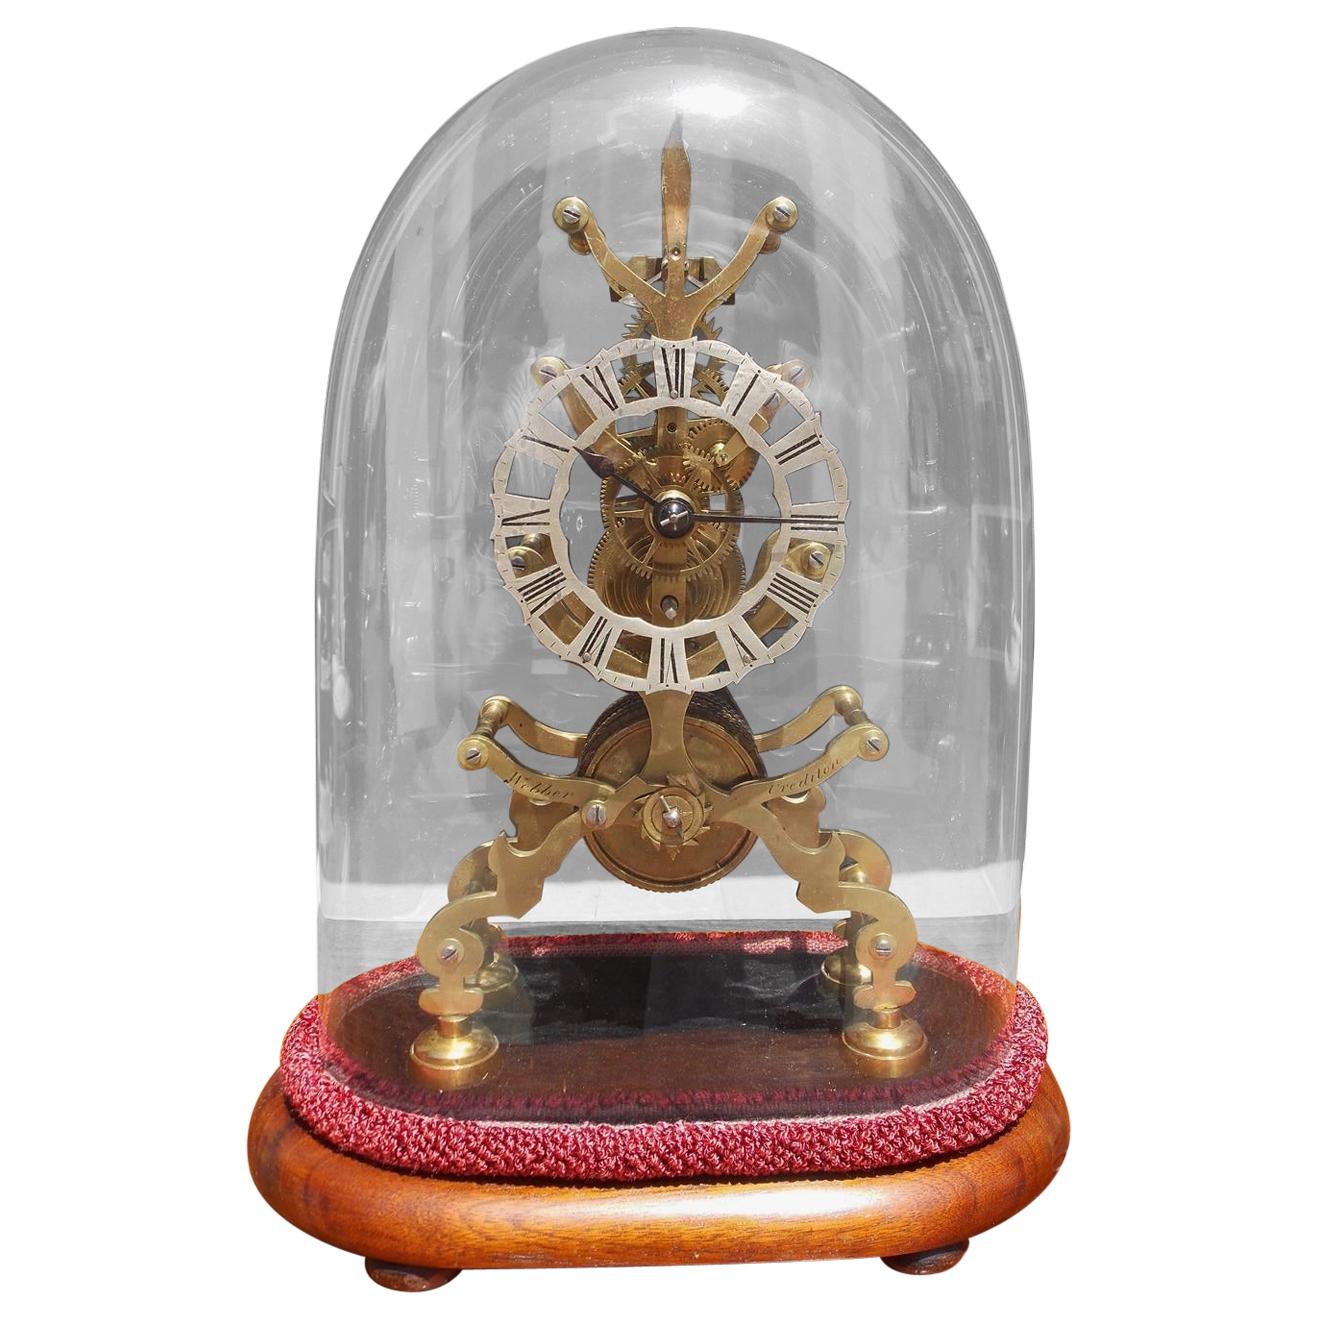 BRASS & GLASS 4 TIME ZONE CLOCK Details about   Remembrance Mantel or Desk 